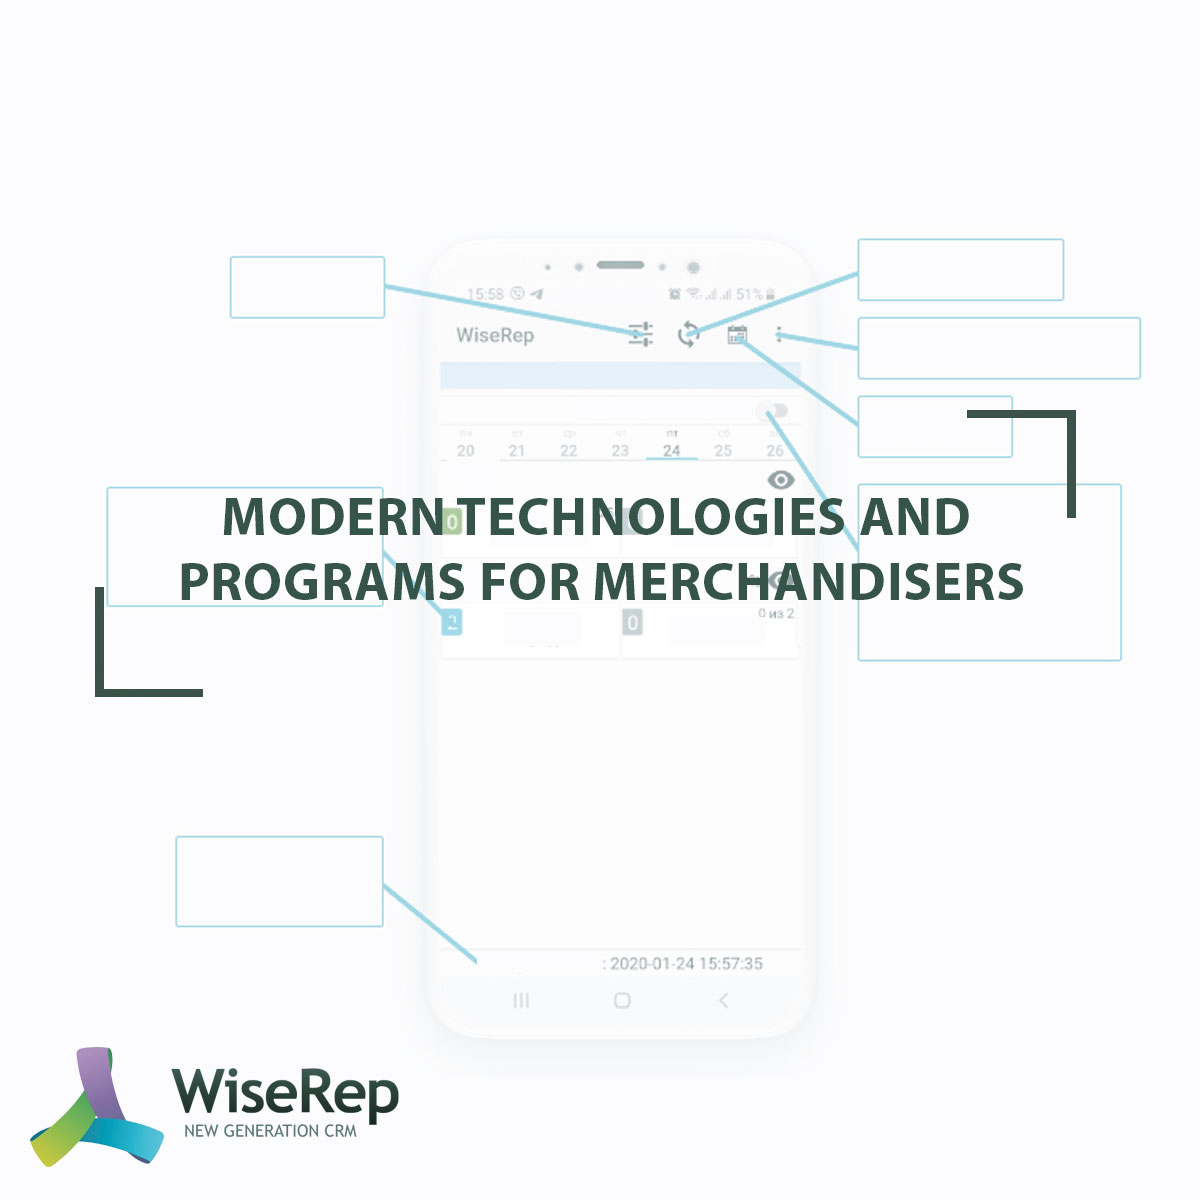 Modern technologies and programs for merchandisers